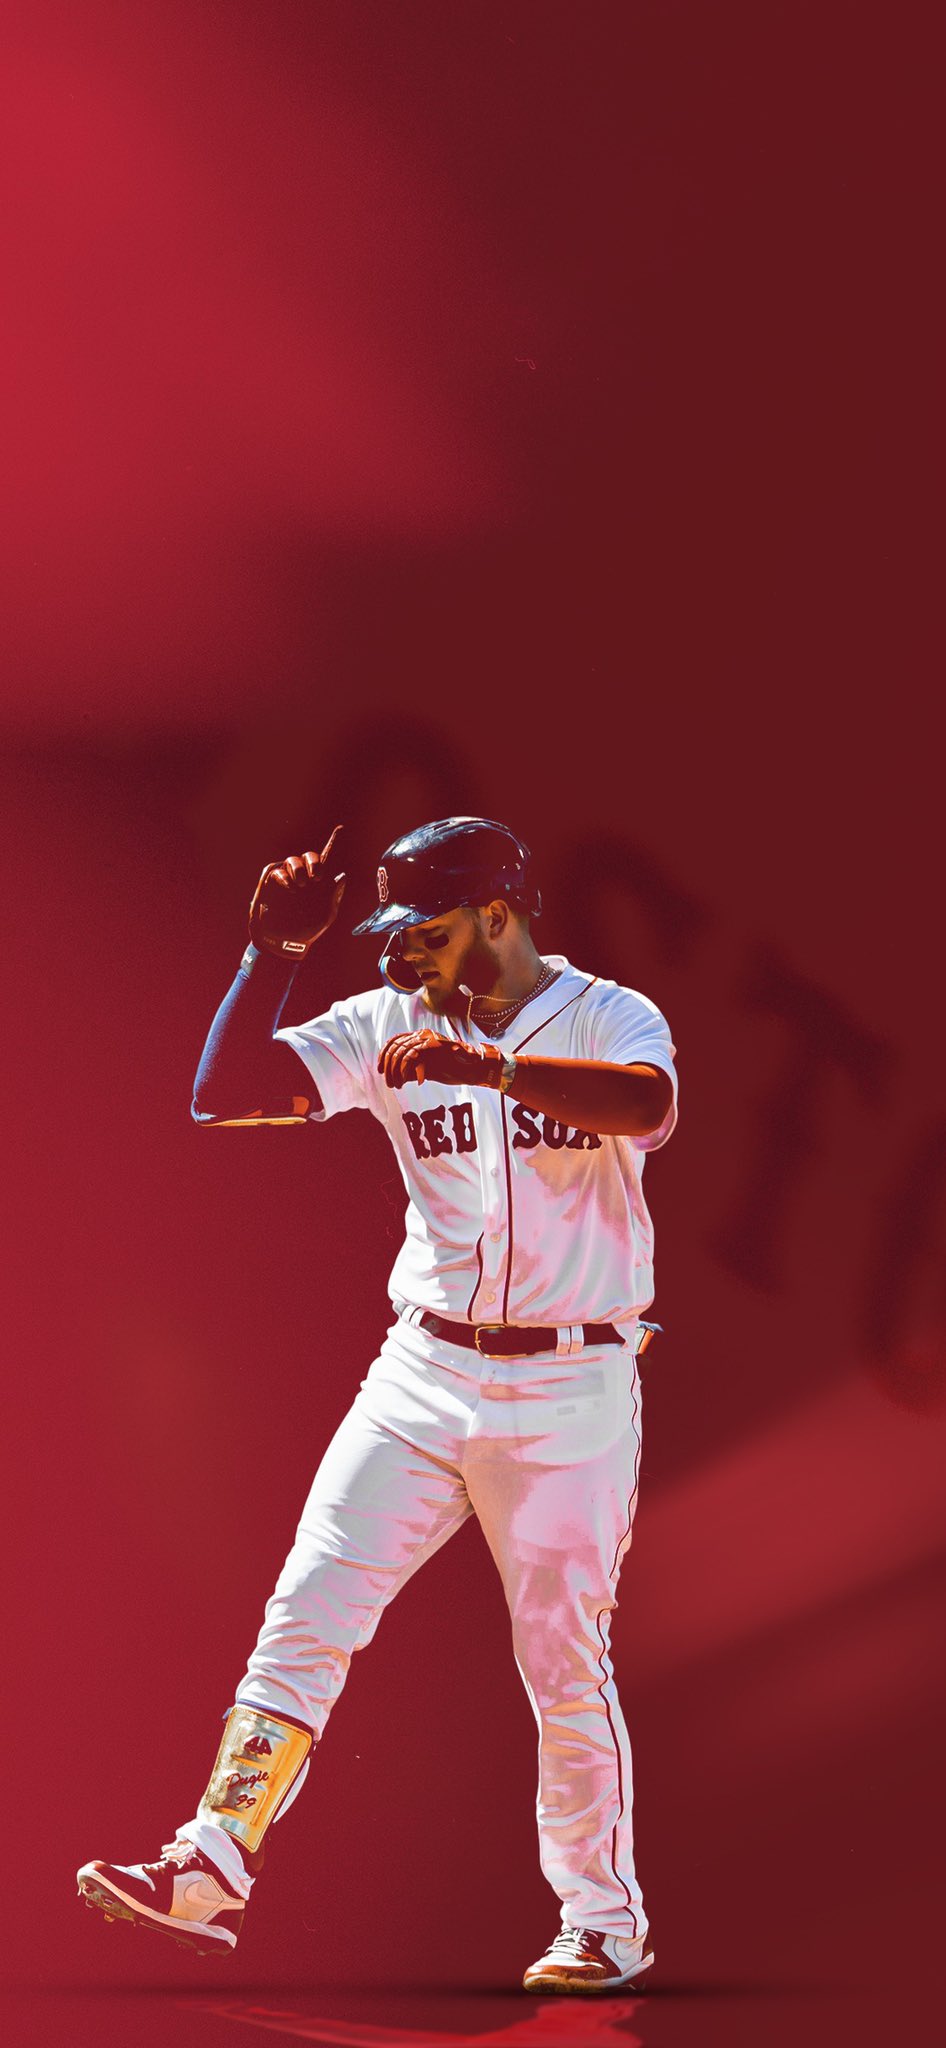 Red Sox on X: You know what day it is. #WallpaperWednesday